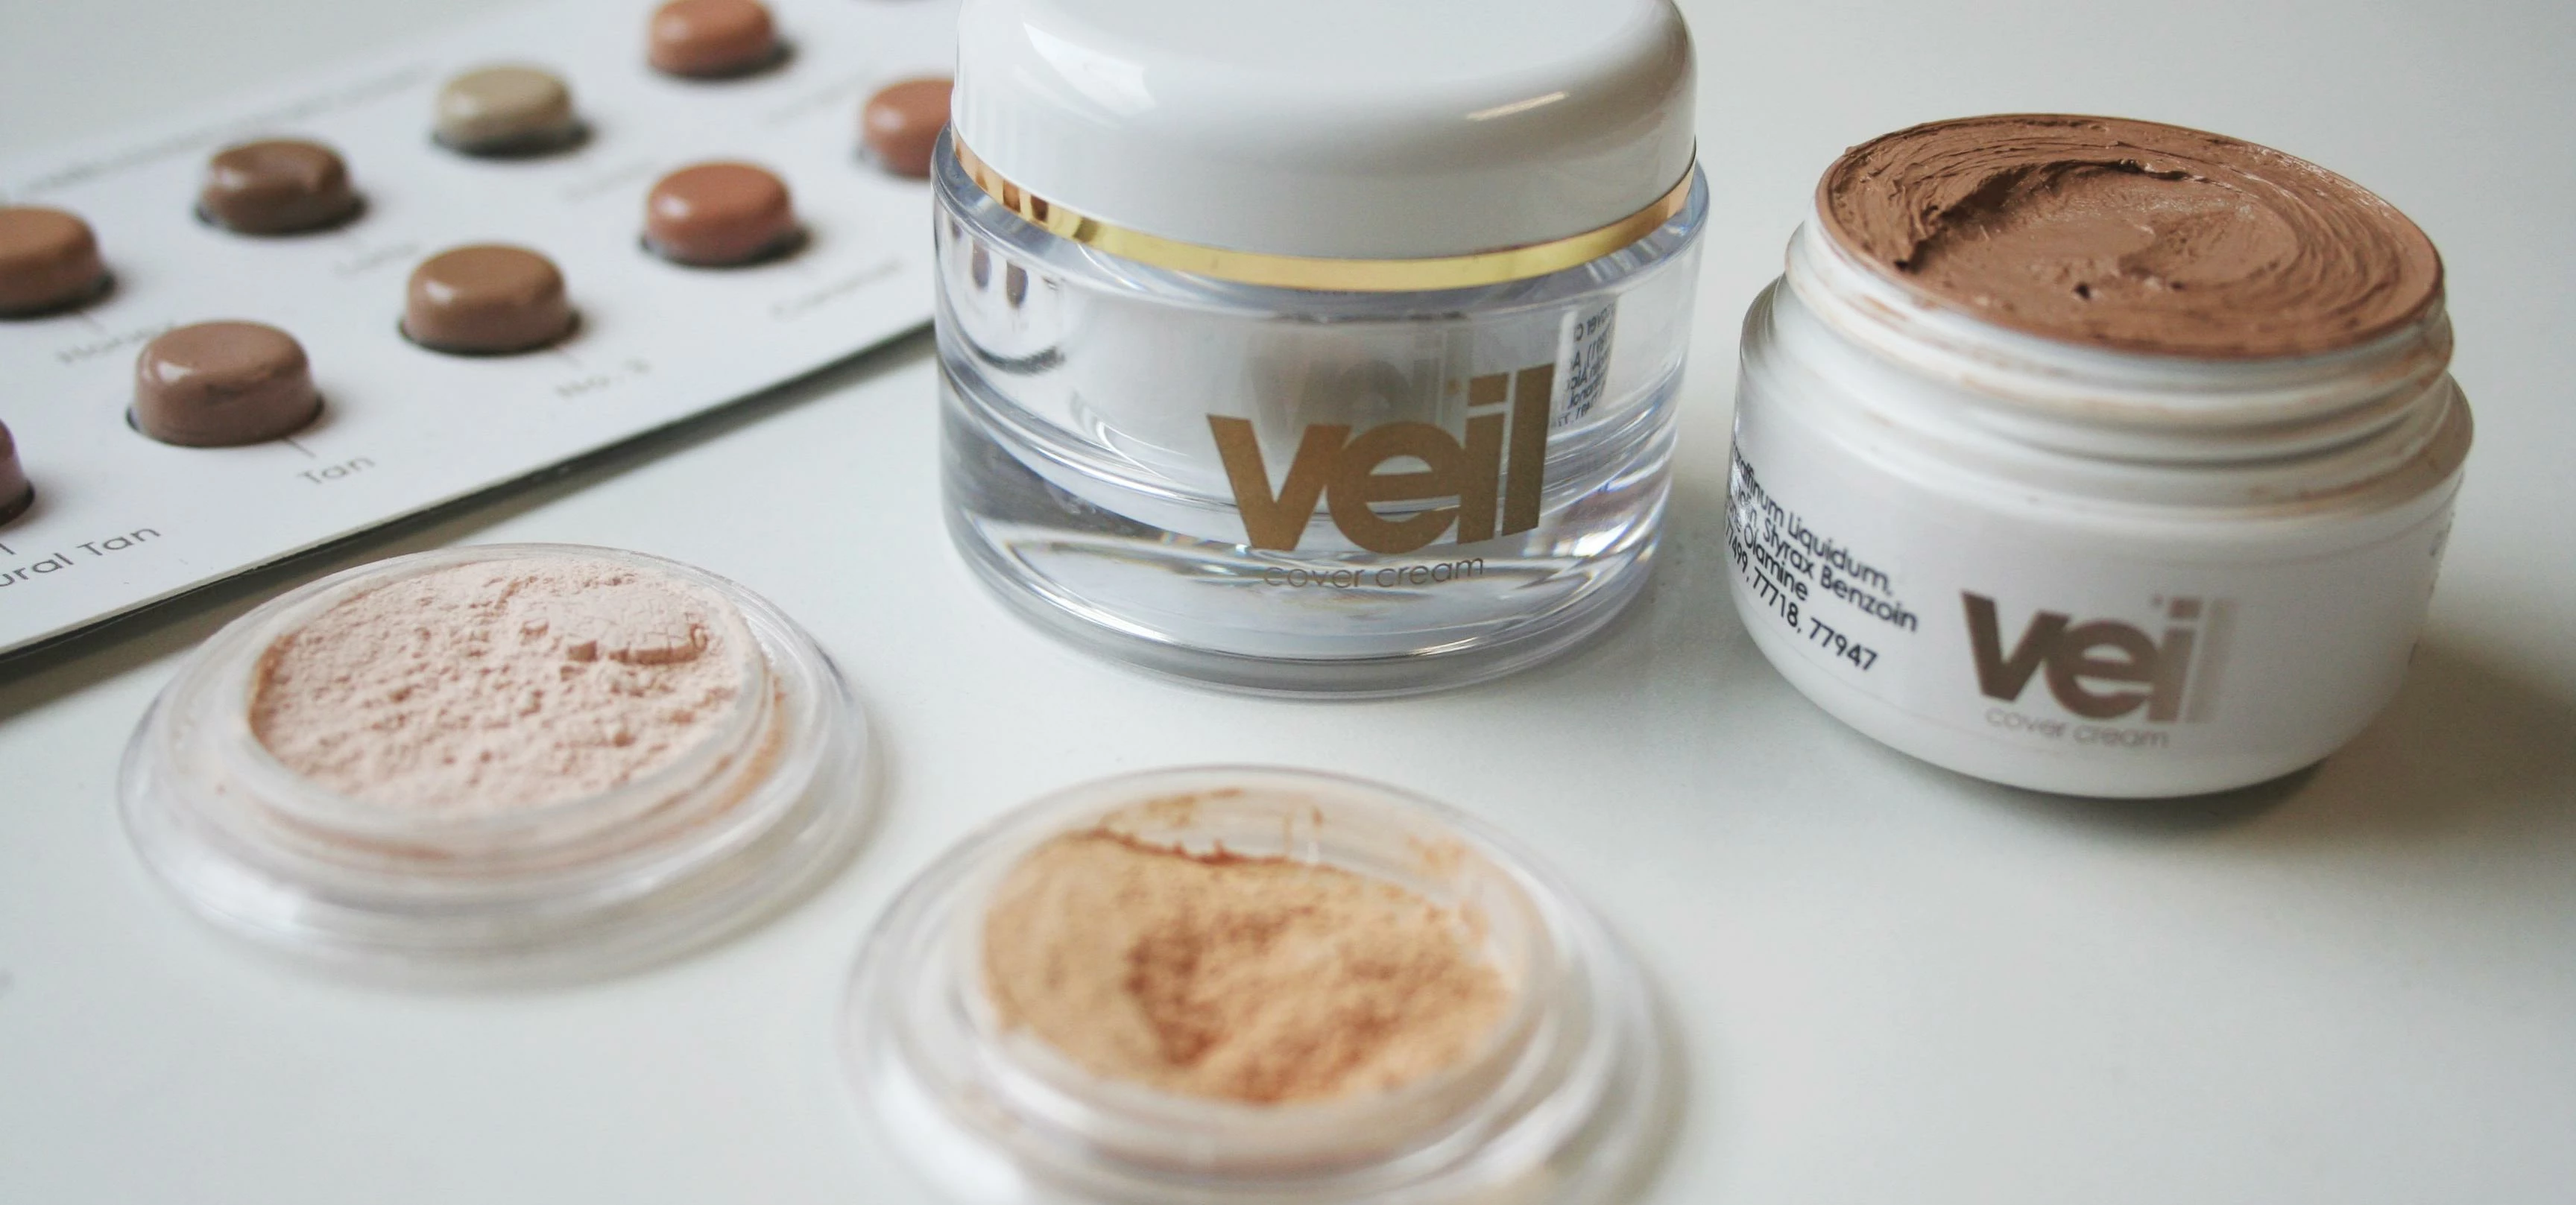 The Creative Alchemist has been appointed to redevelop the Veil Cover Cream brand.